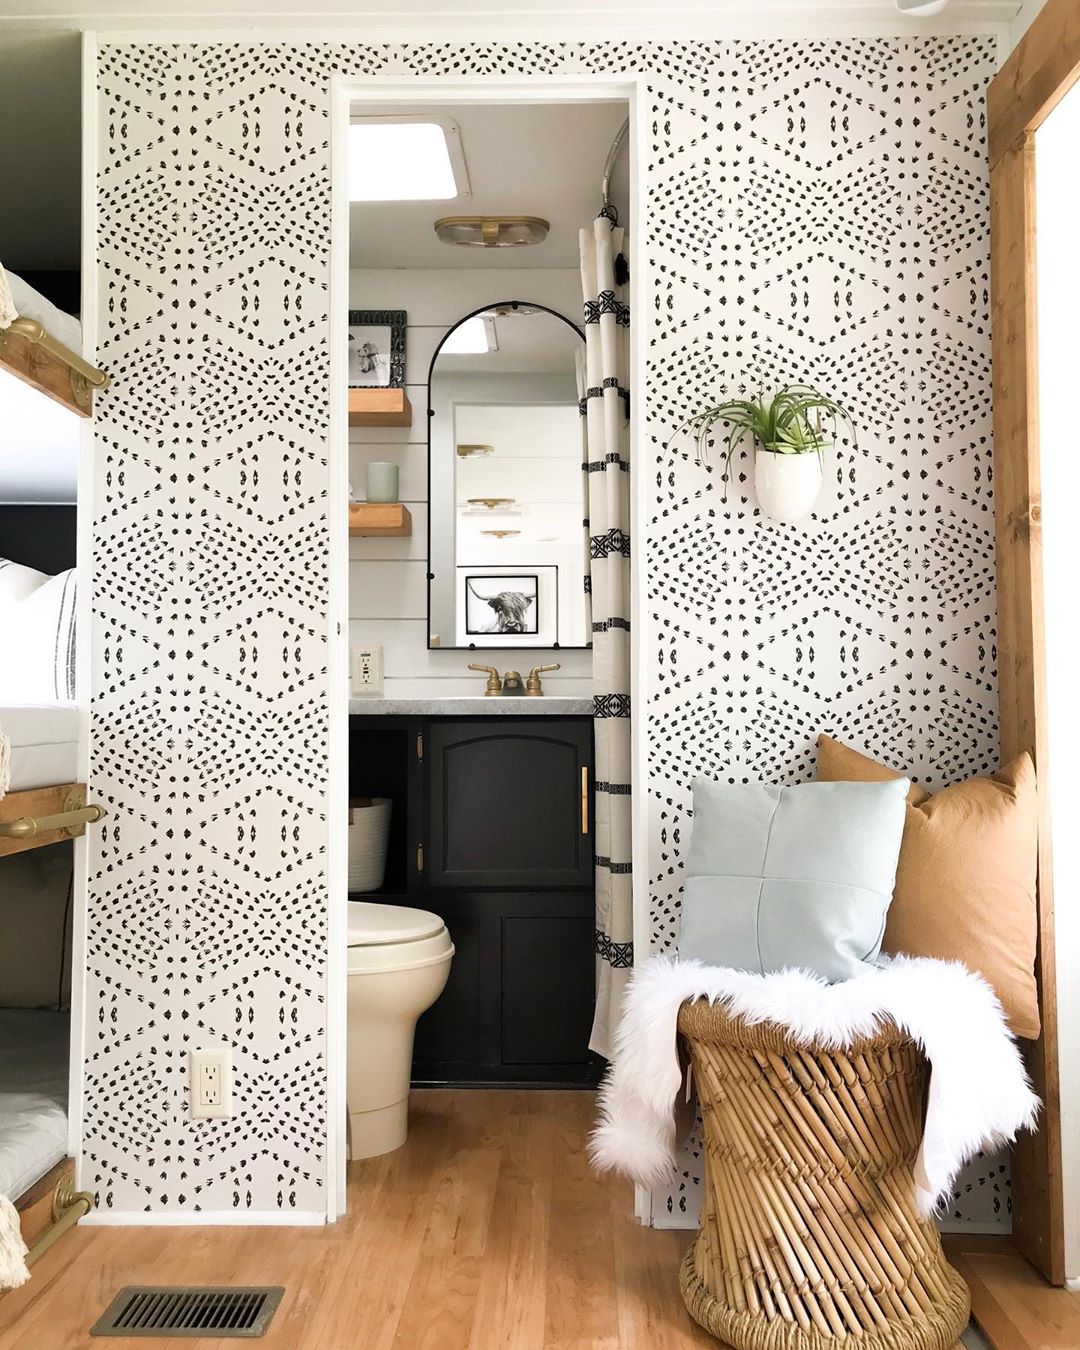 RV walls with decorative wall paper photo by Instagram user @troopnashville